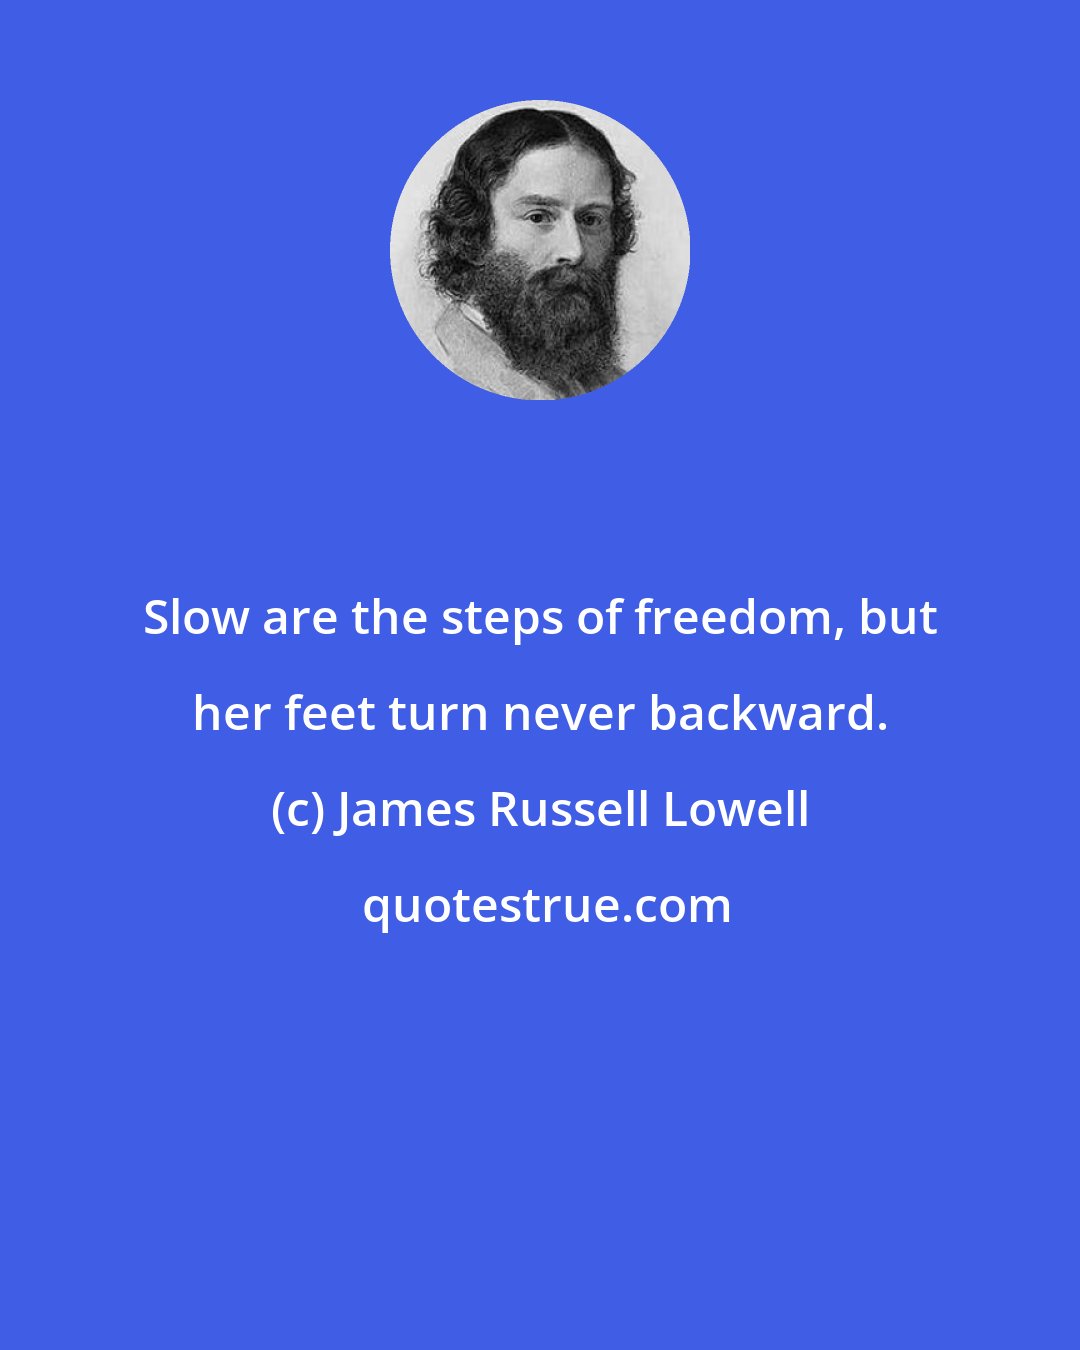 James Russell Lowell: Slow are the steps of freedom, but her feet turn never backward.